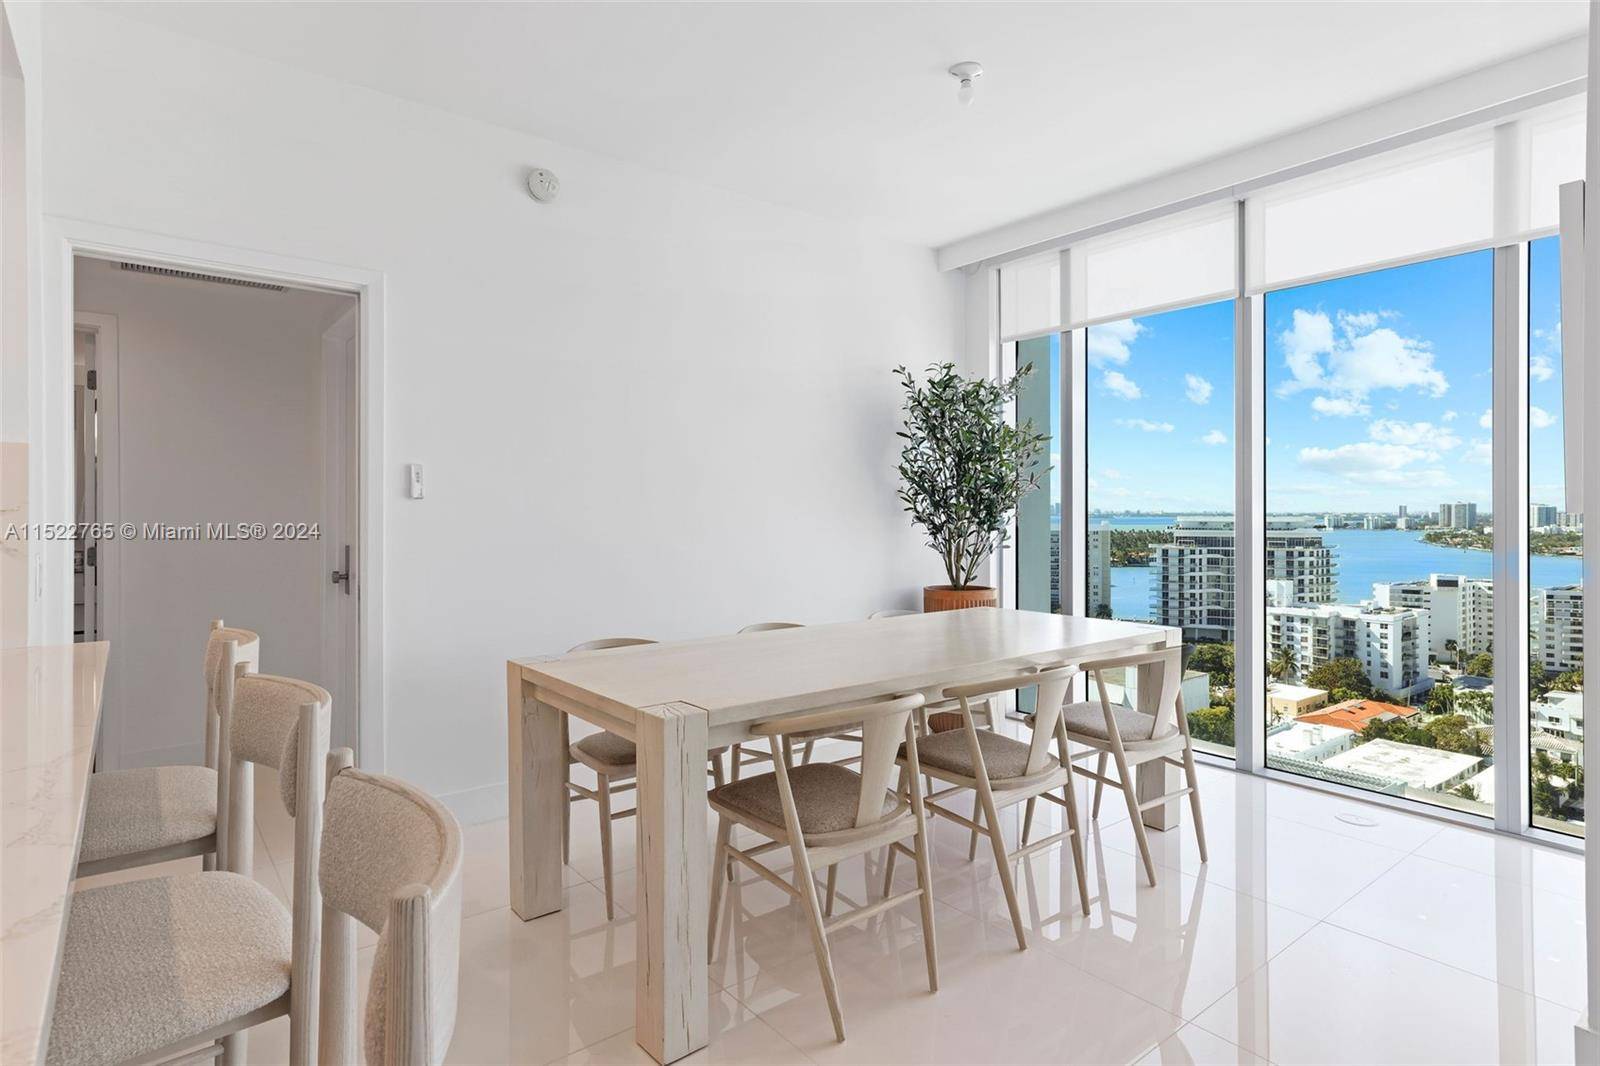 This renovated high floor condo offers breathtaking views of the sunset and inter coastal at the Carillon Miami Beach in Florida.